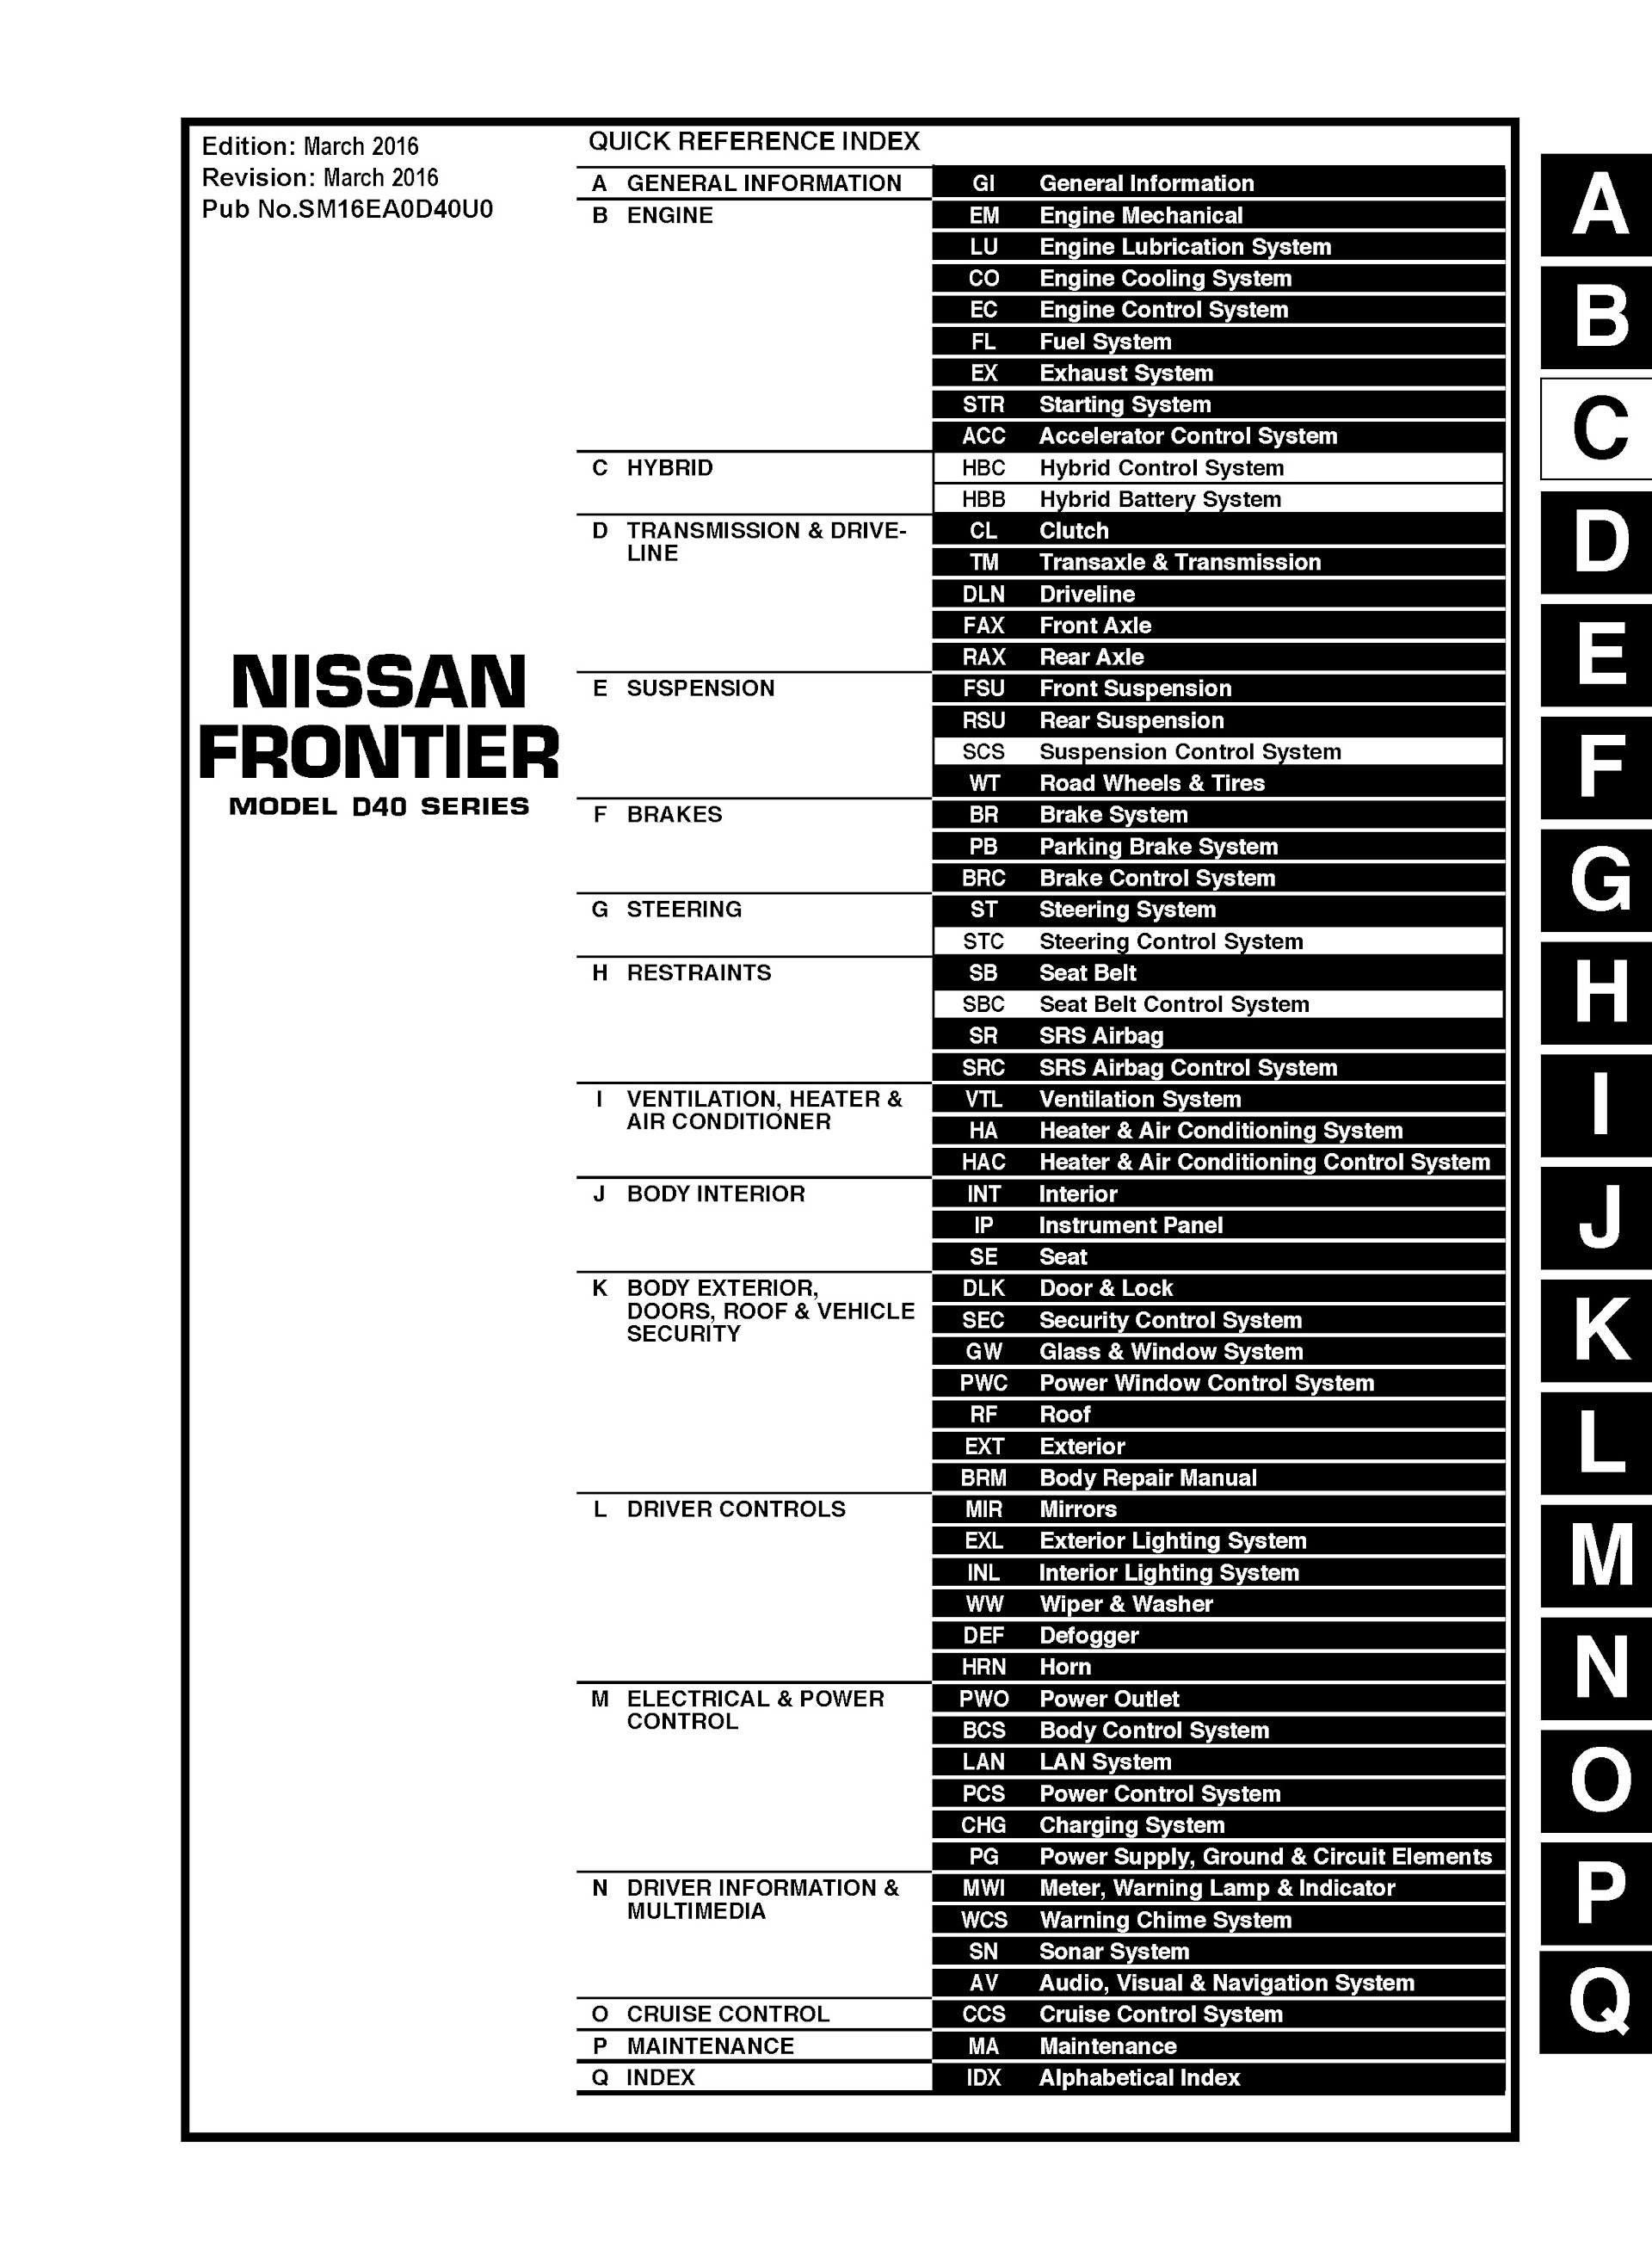 Donwload the OEM service and workshop repair manual for the 2017 Nissan Frontier, model D40 sereis in PDF format